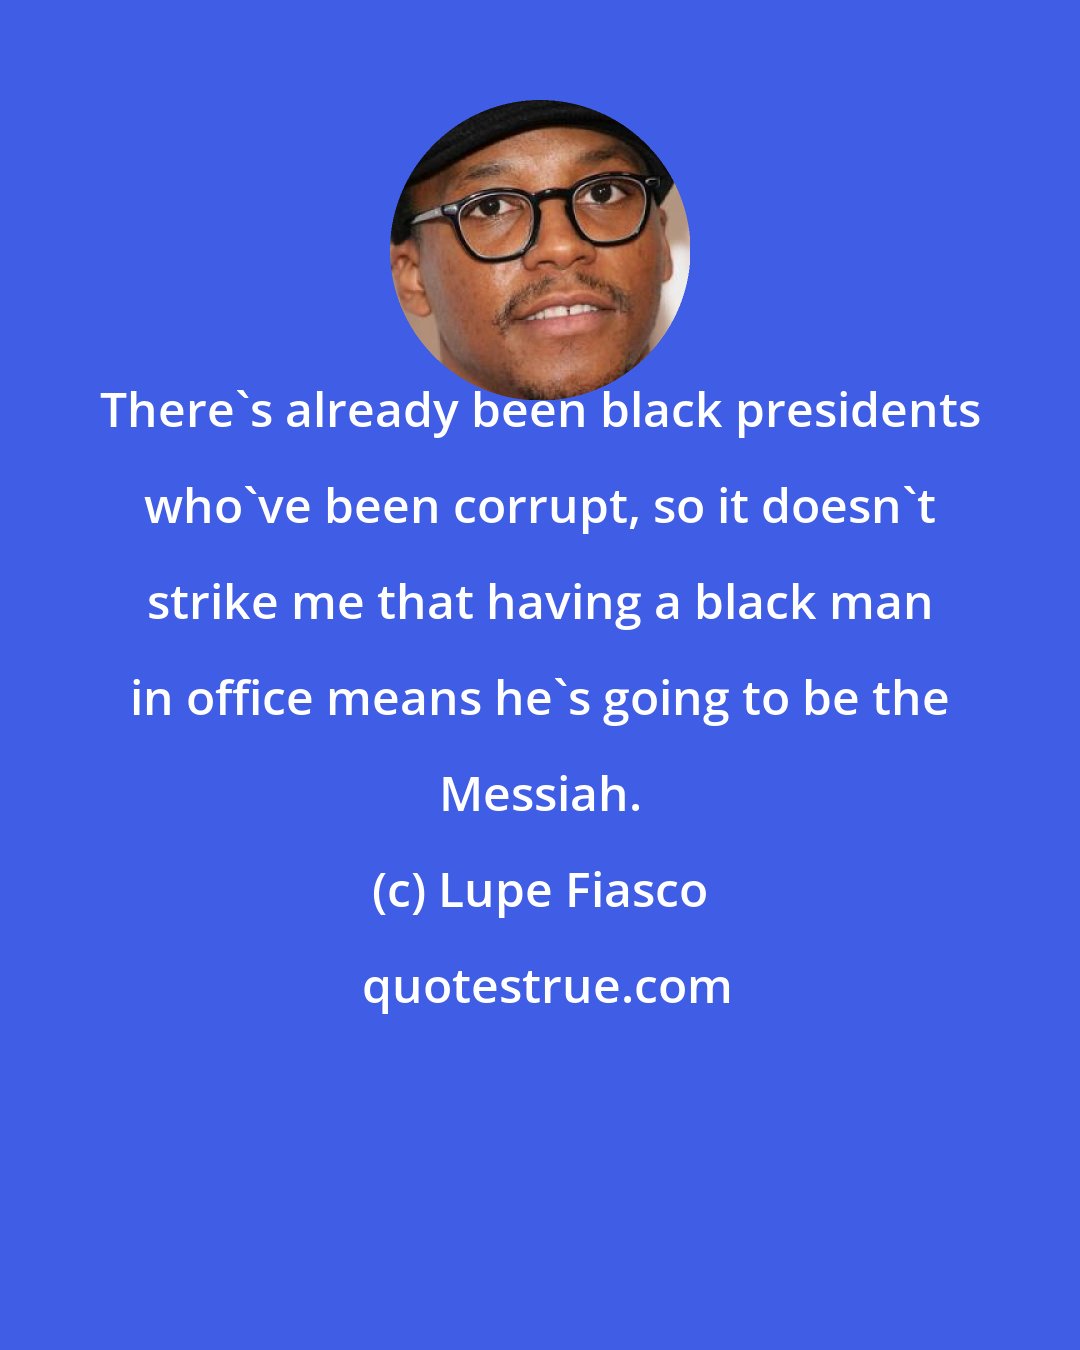 Lupe Fiasco: There's already been black presidents who've been corrupt, so it doesn't strike me that having a black man in office means he's going to be the Messiah.